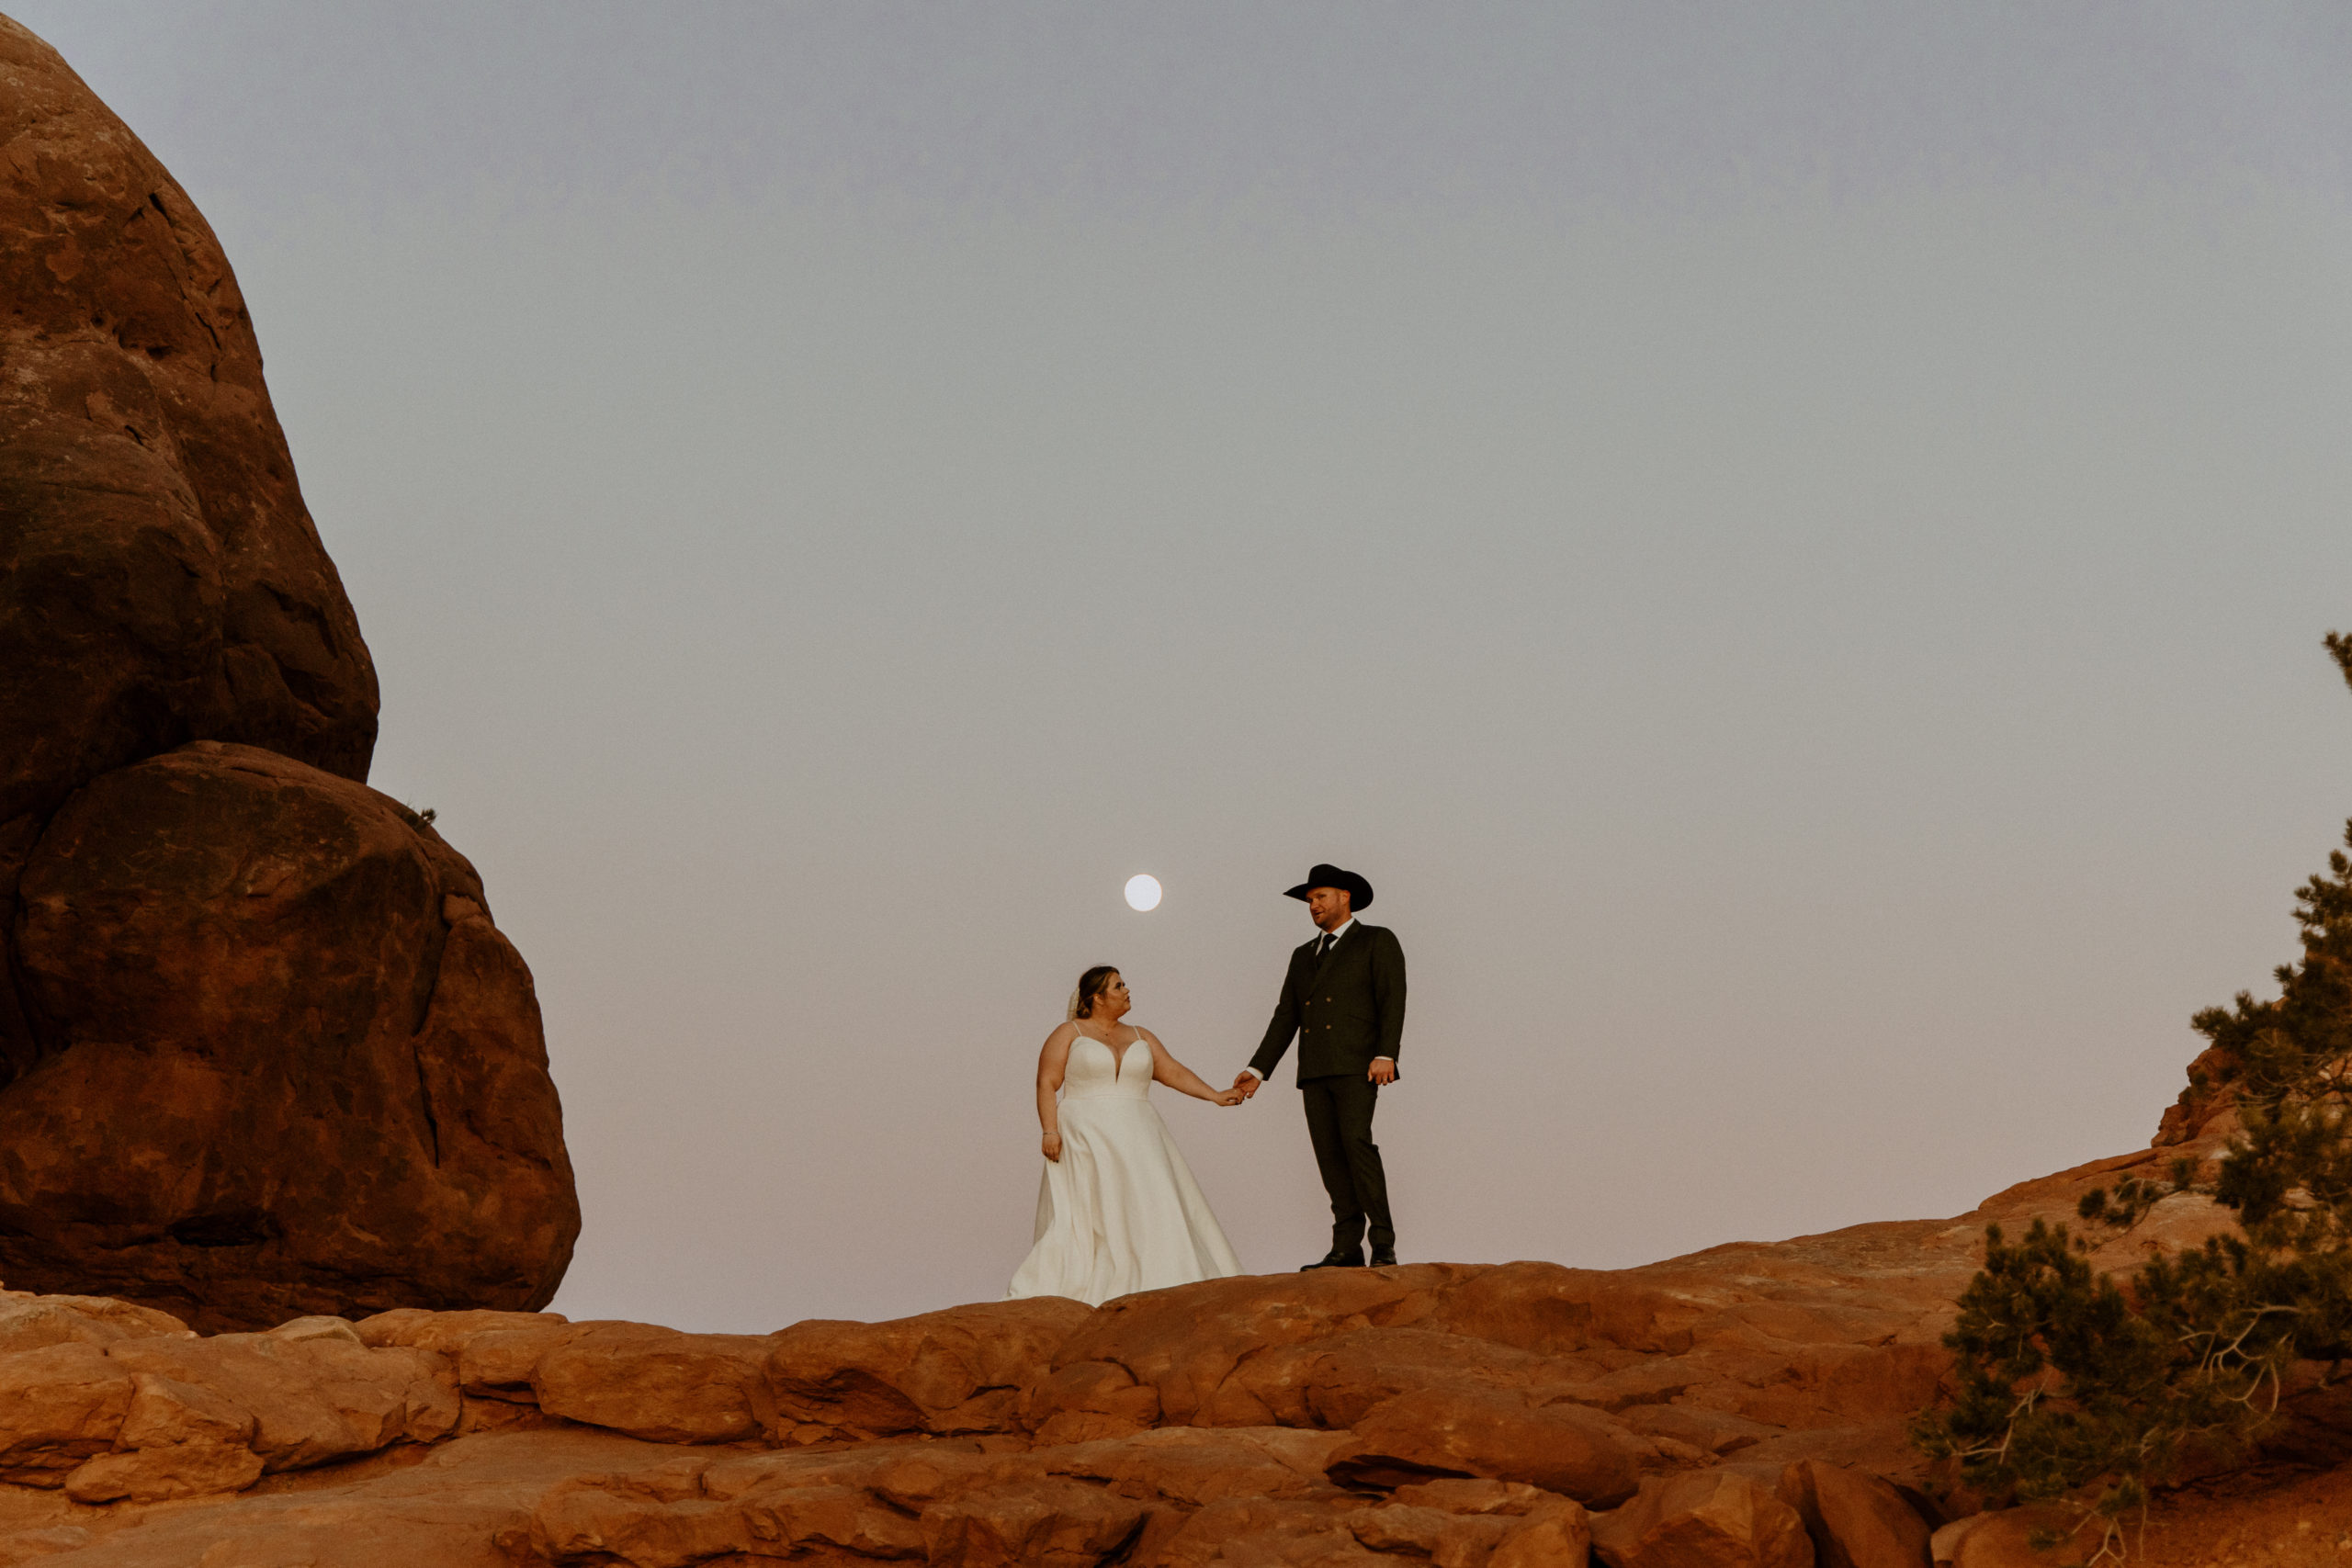 the couple standing by the moon as the sun sets